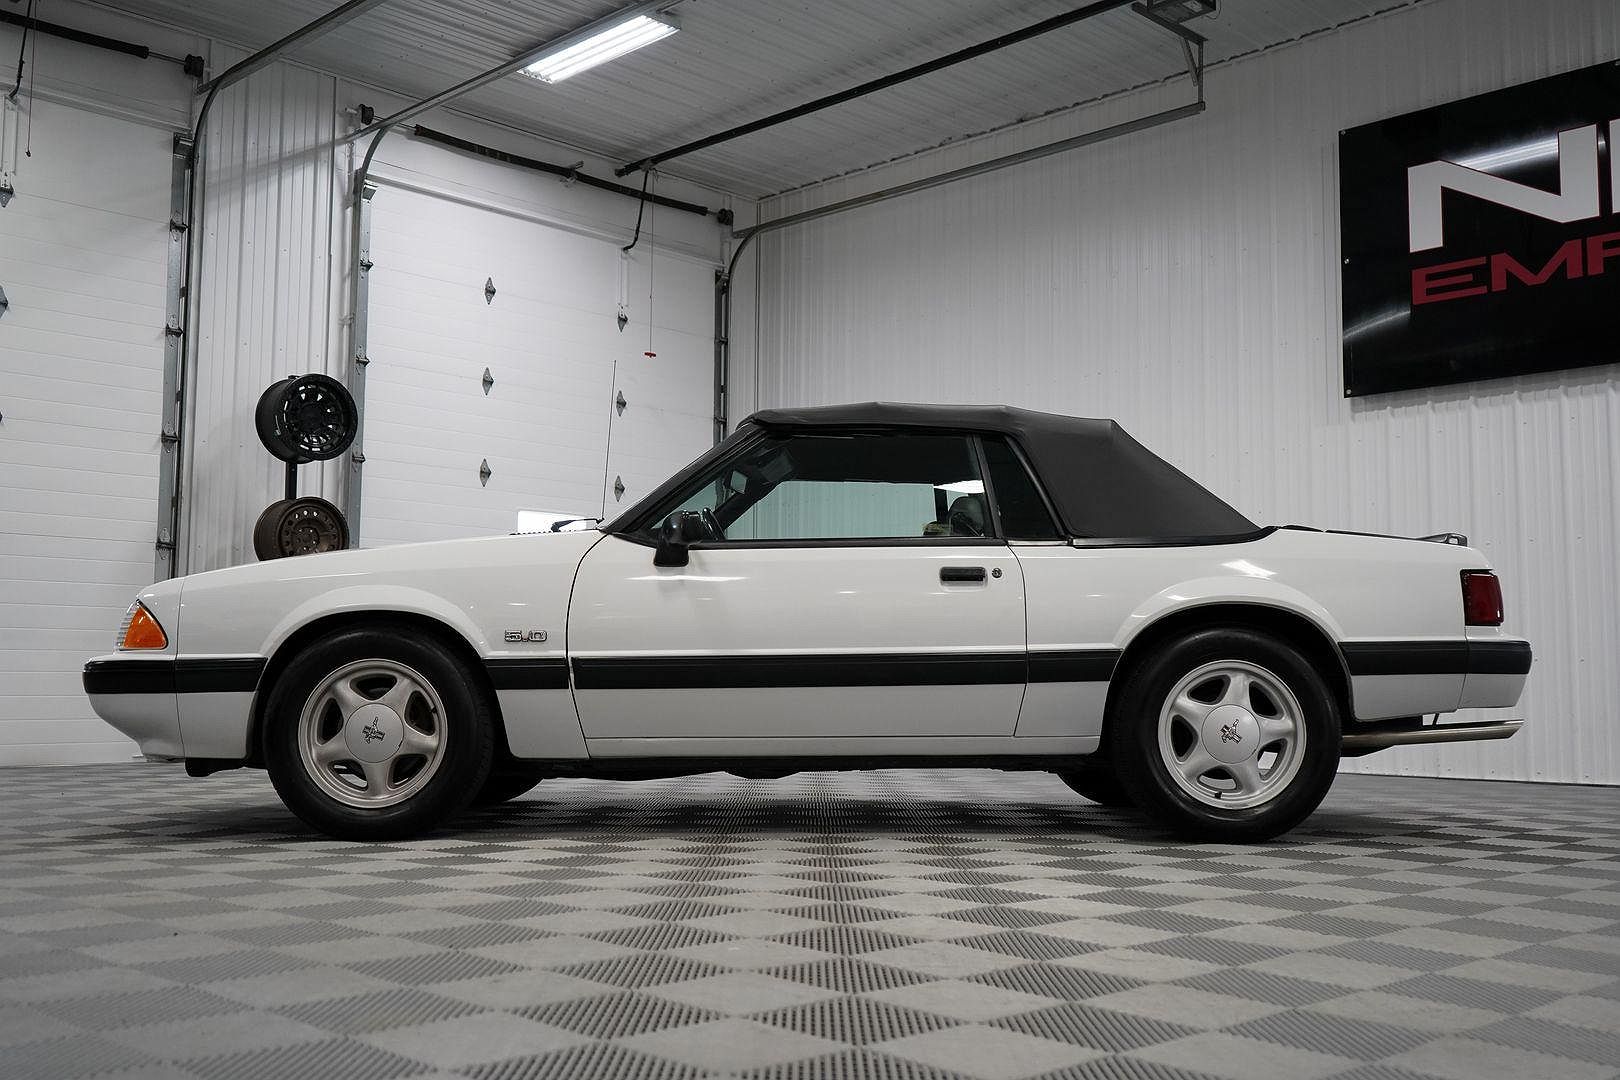 1991 Ford Mustang LX image 23